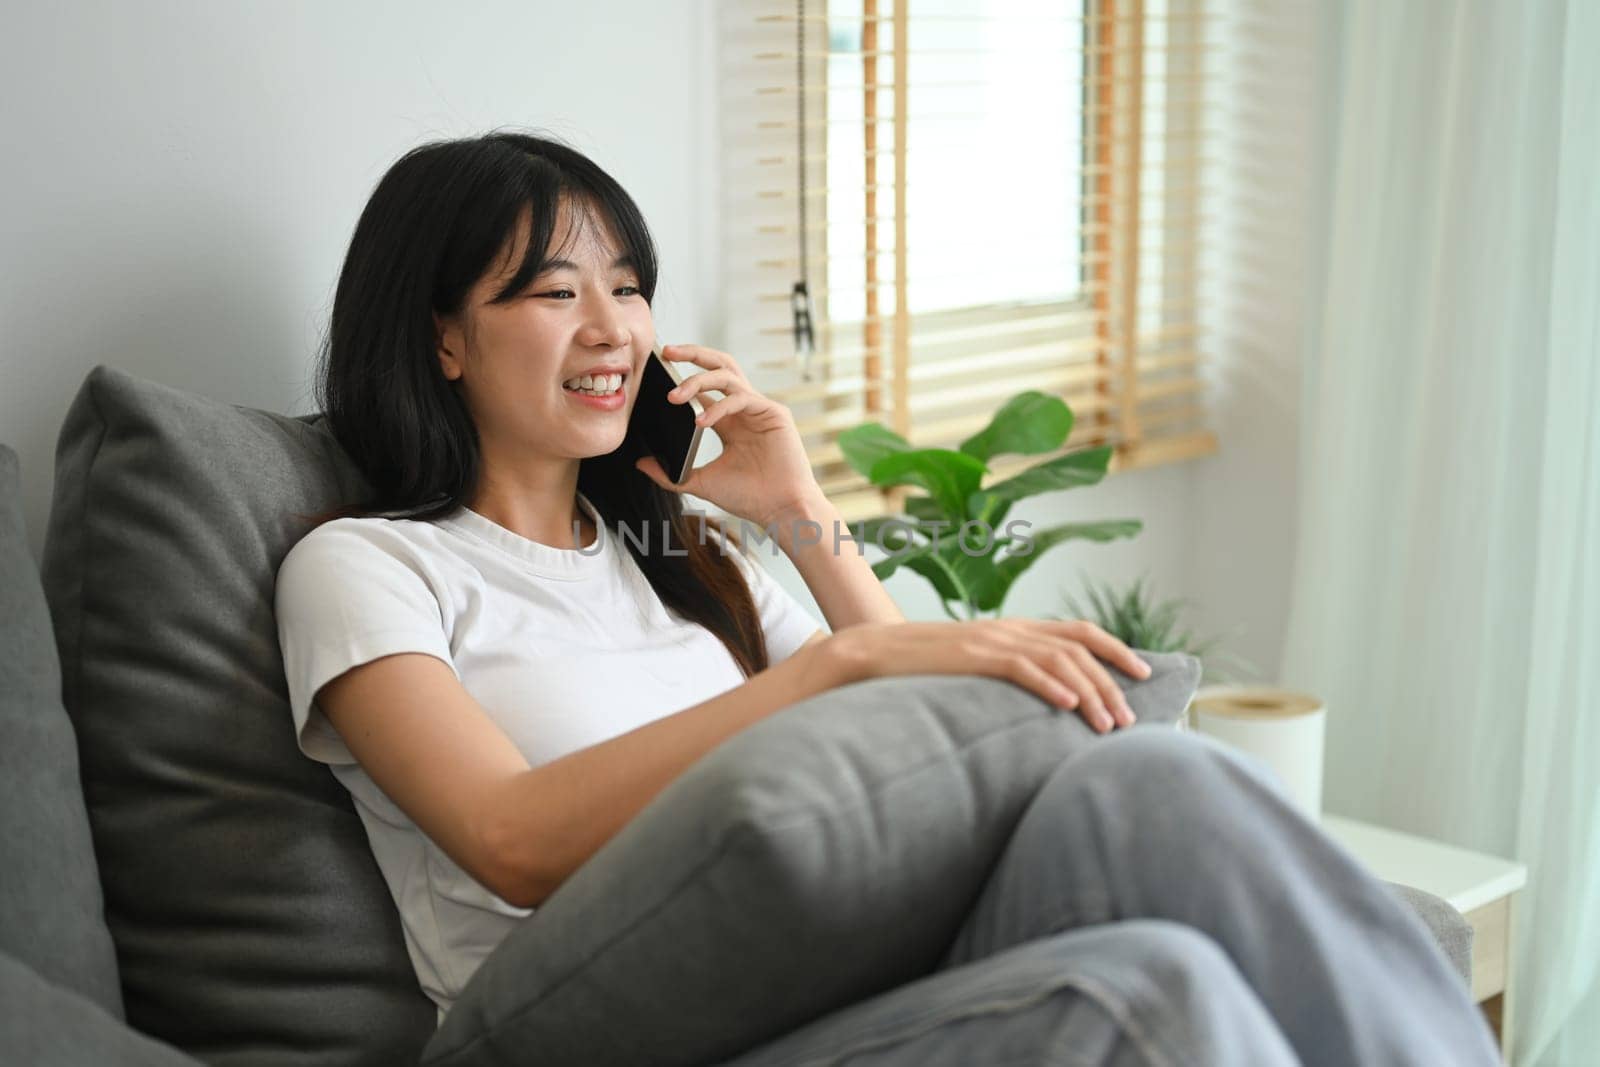 Smiling young woman in casual clothes having g pleasant phone conversation in living room.